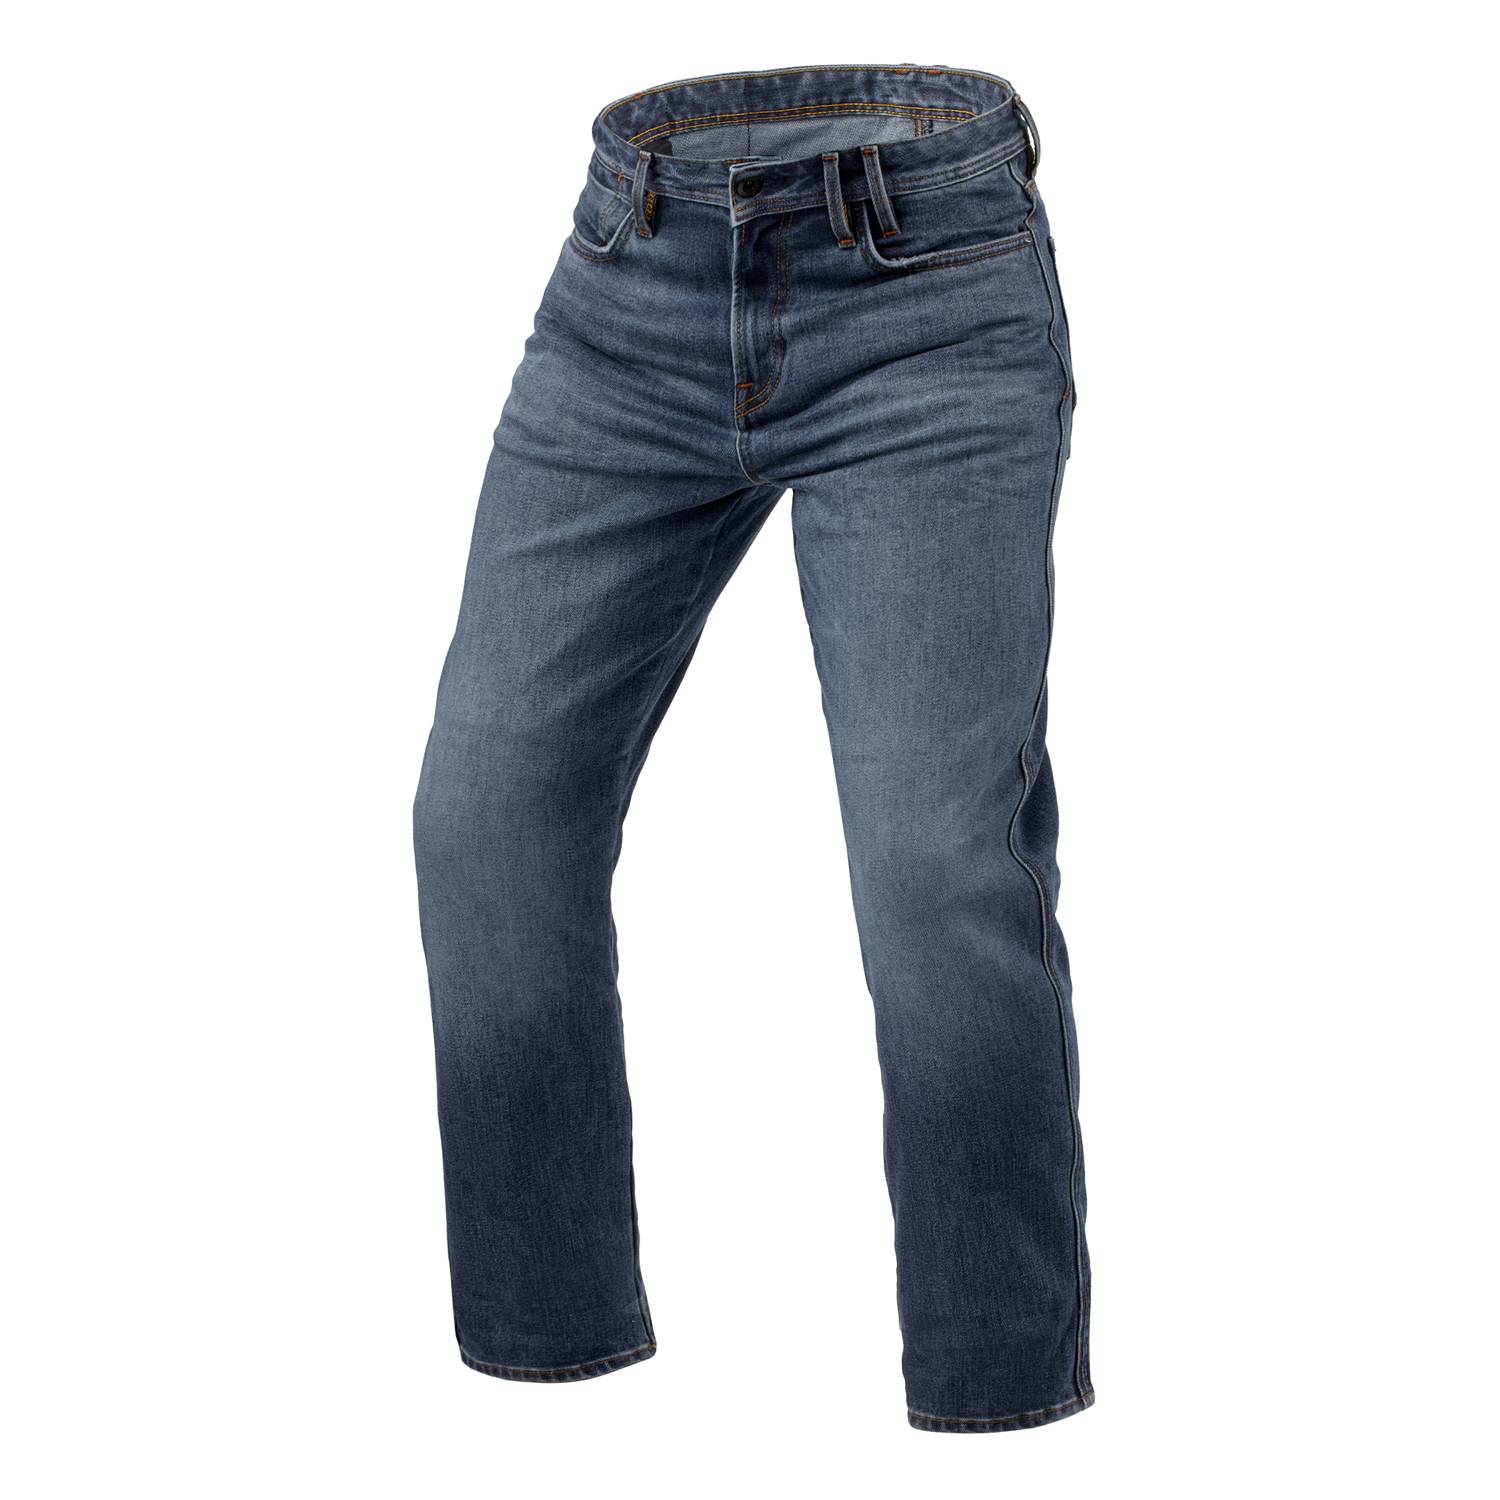 Image of REV'IT! Jeans Lombard 3 RF Medium Blue Stone L34 Motorcycle Jeans Size L34/W31 ID 8700001375955